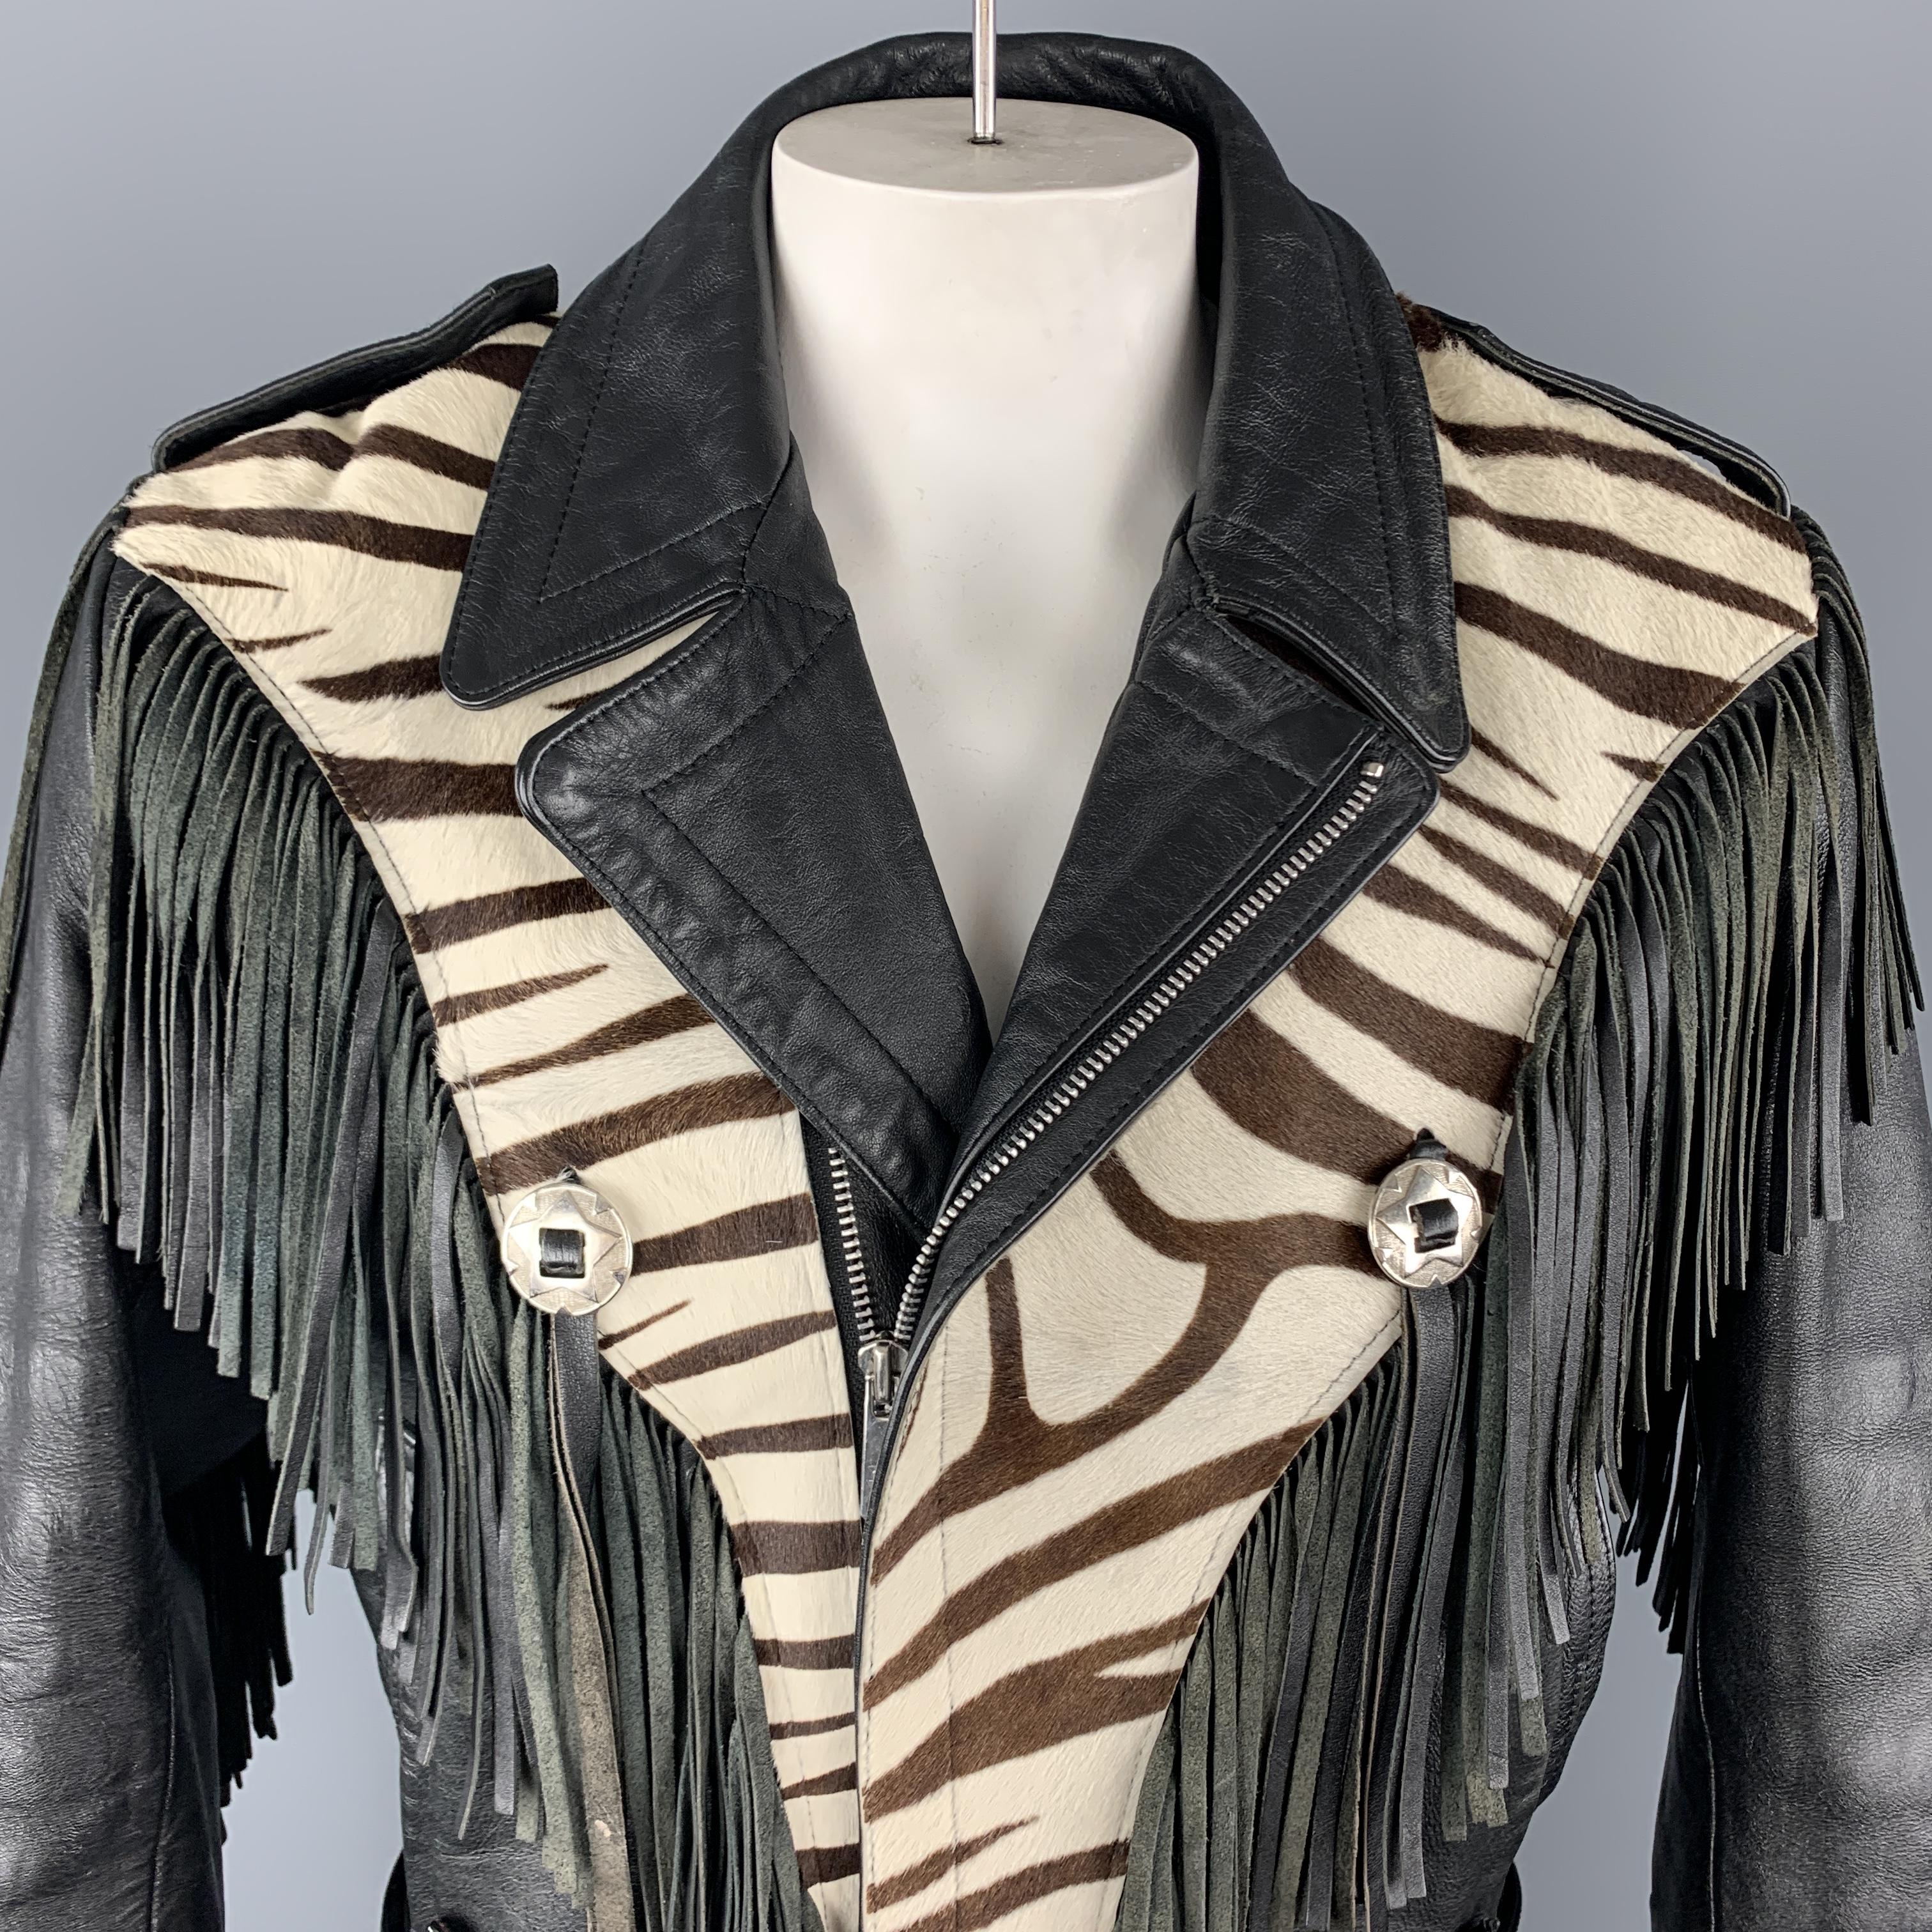 Vintage VERDUCCI biker jacket comes in black leather with an asymmetrical zip front, pointed lapel, fringe trim, silver tone embellishments, epaulets, and cream and brown zebra print panel.

Very Good Pre-Owned Condition.
Marked: